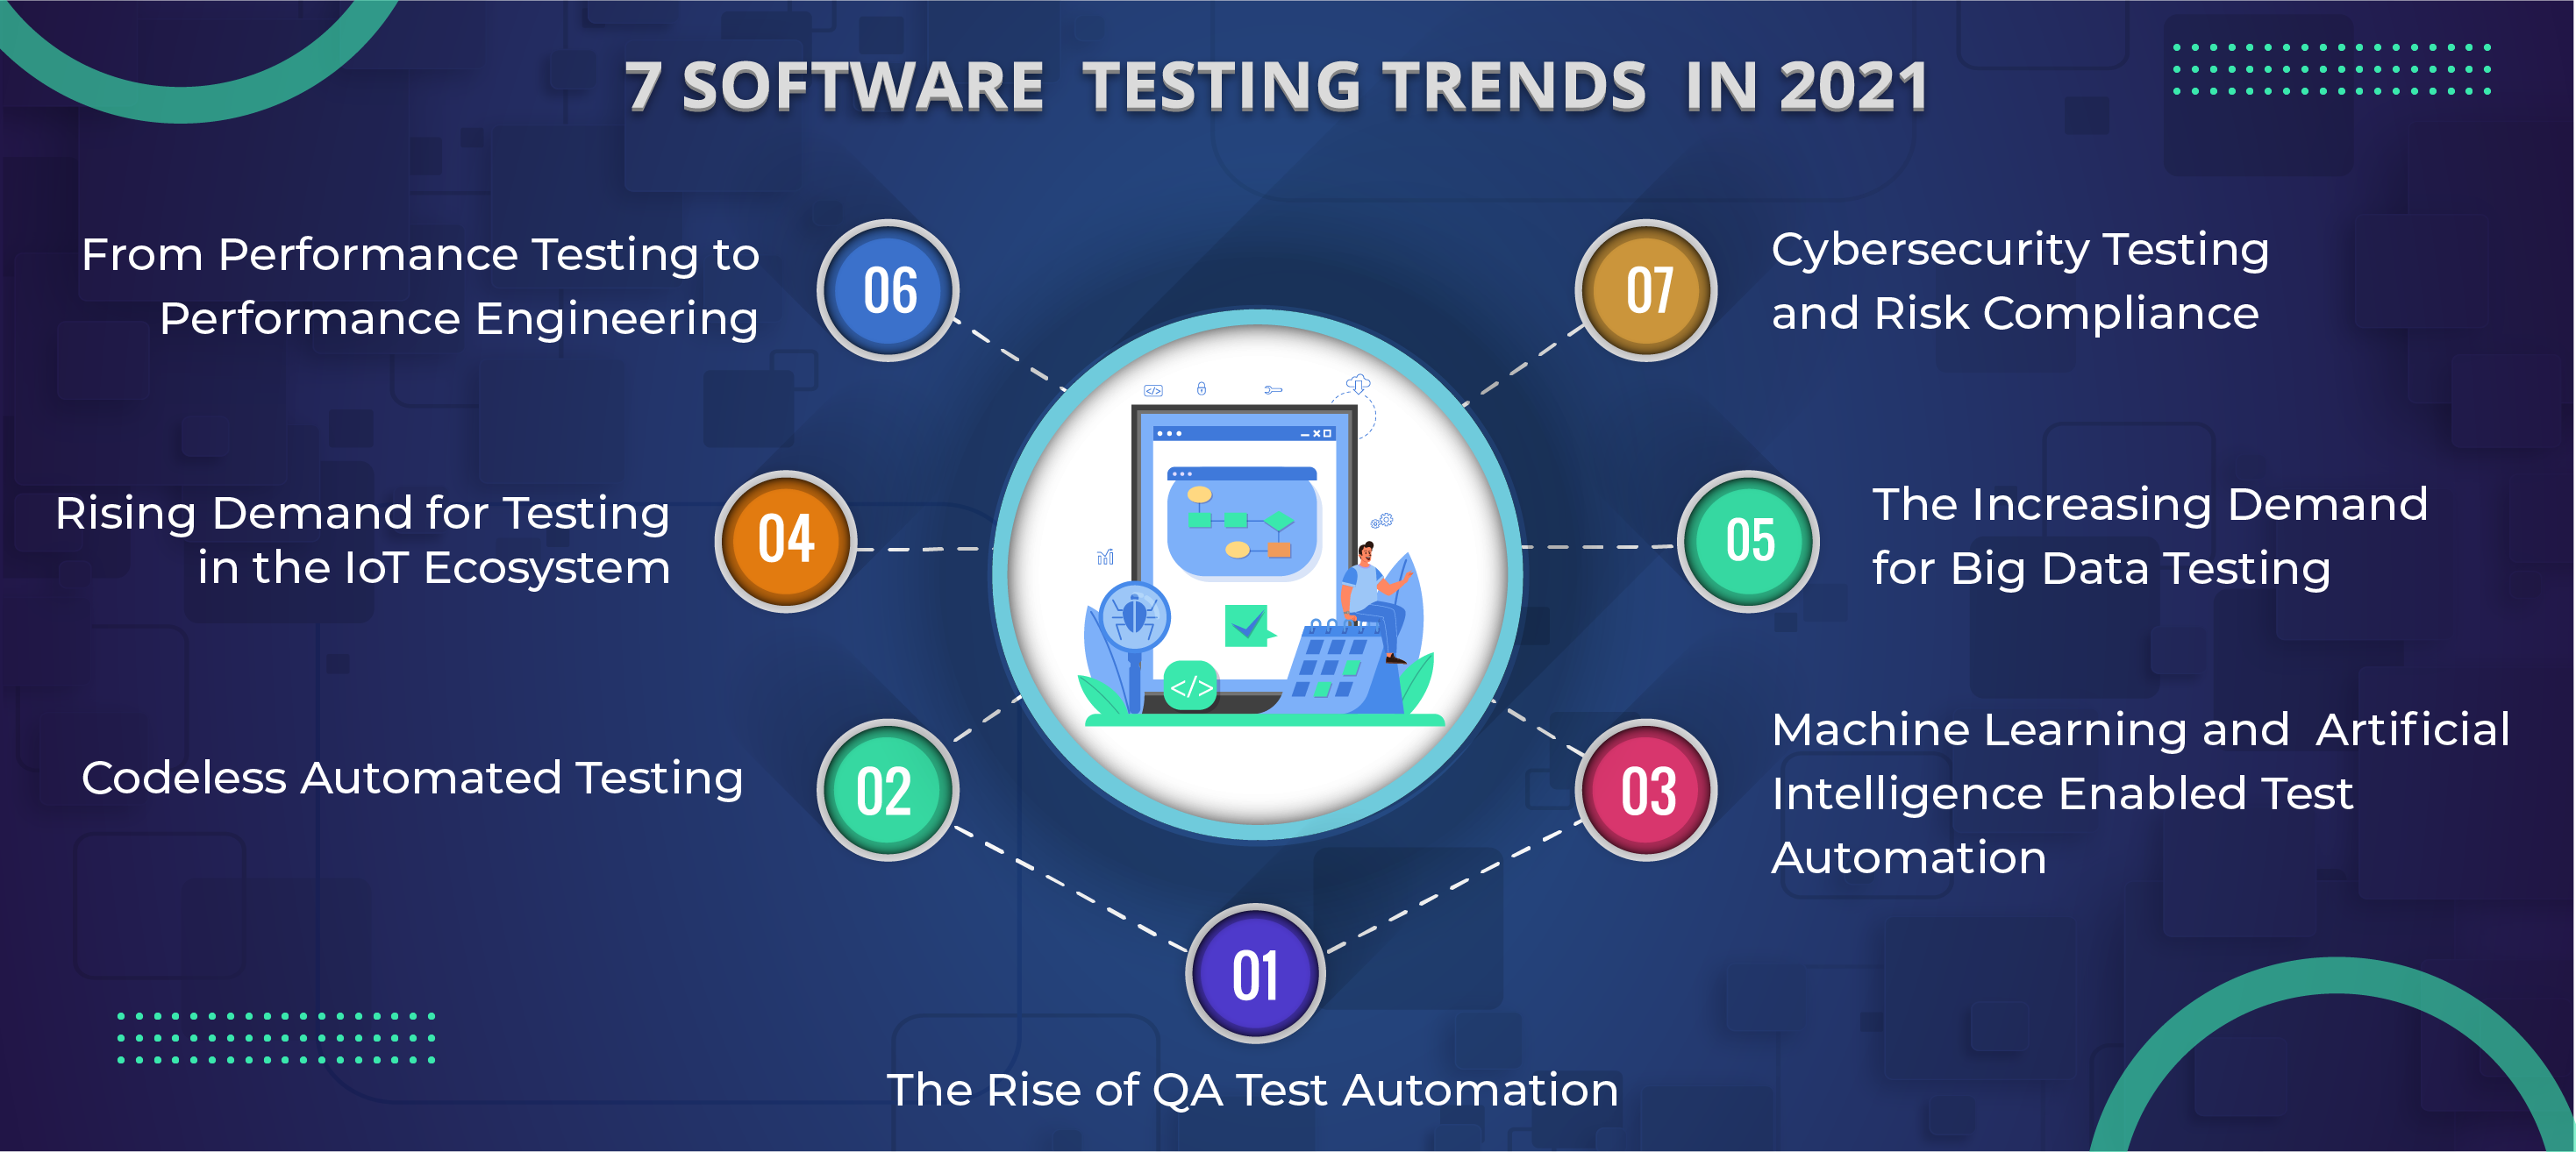 Top 7 Software Testing Trends to Follow Closely in 2021 